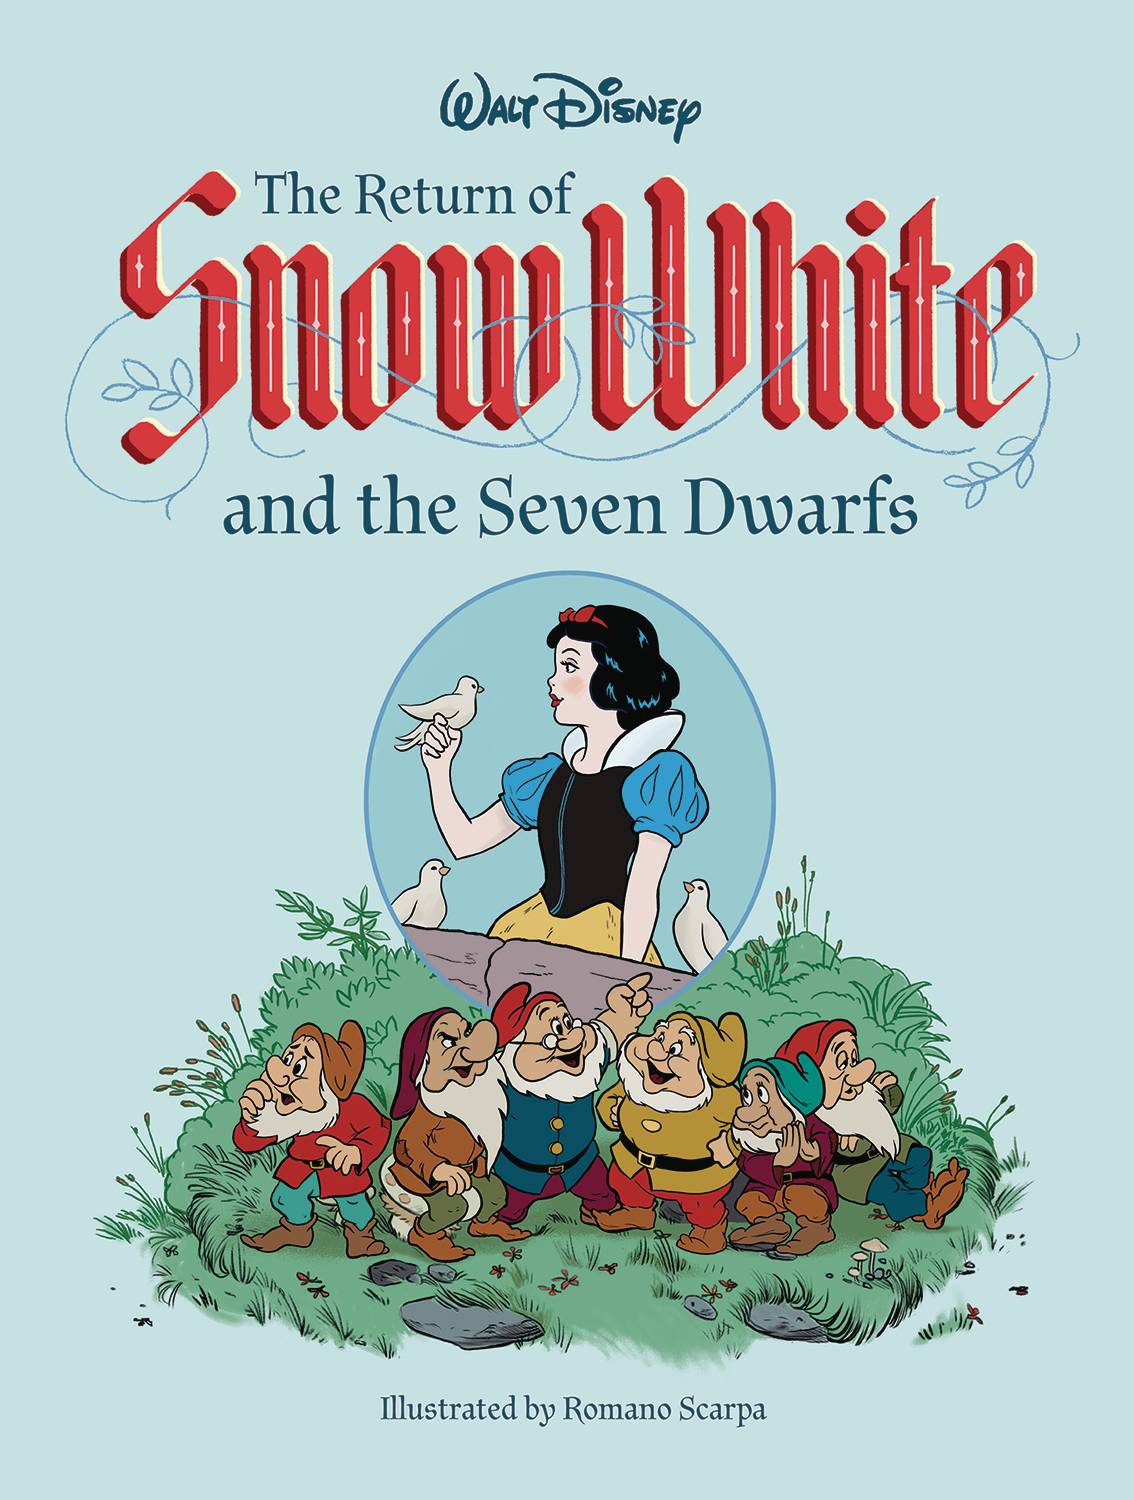 DISNEY'S THE RETURN OF SNOW WHITE AND THE SEVEN DWARFS